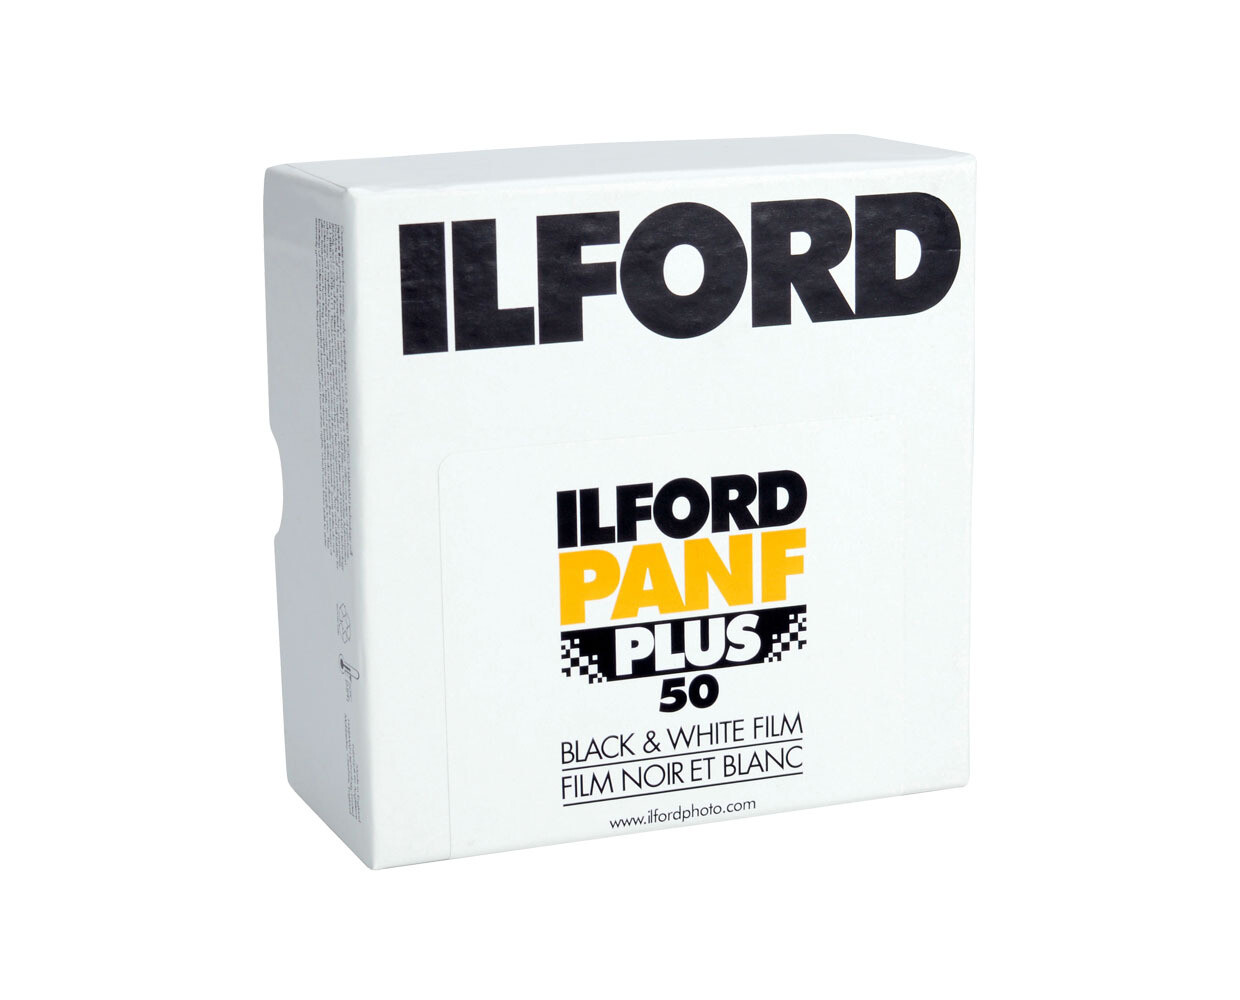 ILFORD Pan F Plus 50, 35mm x 30,5meter to order